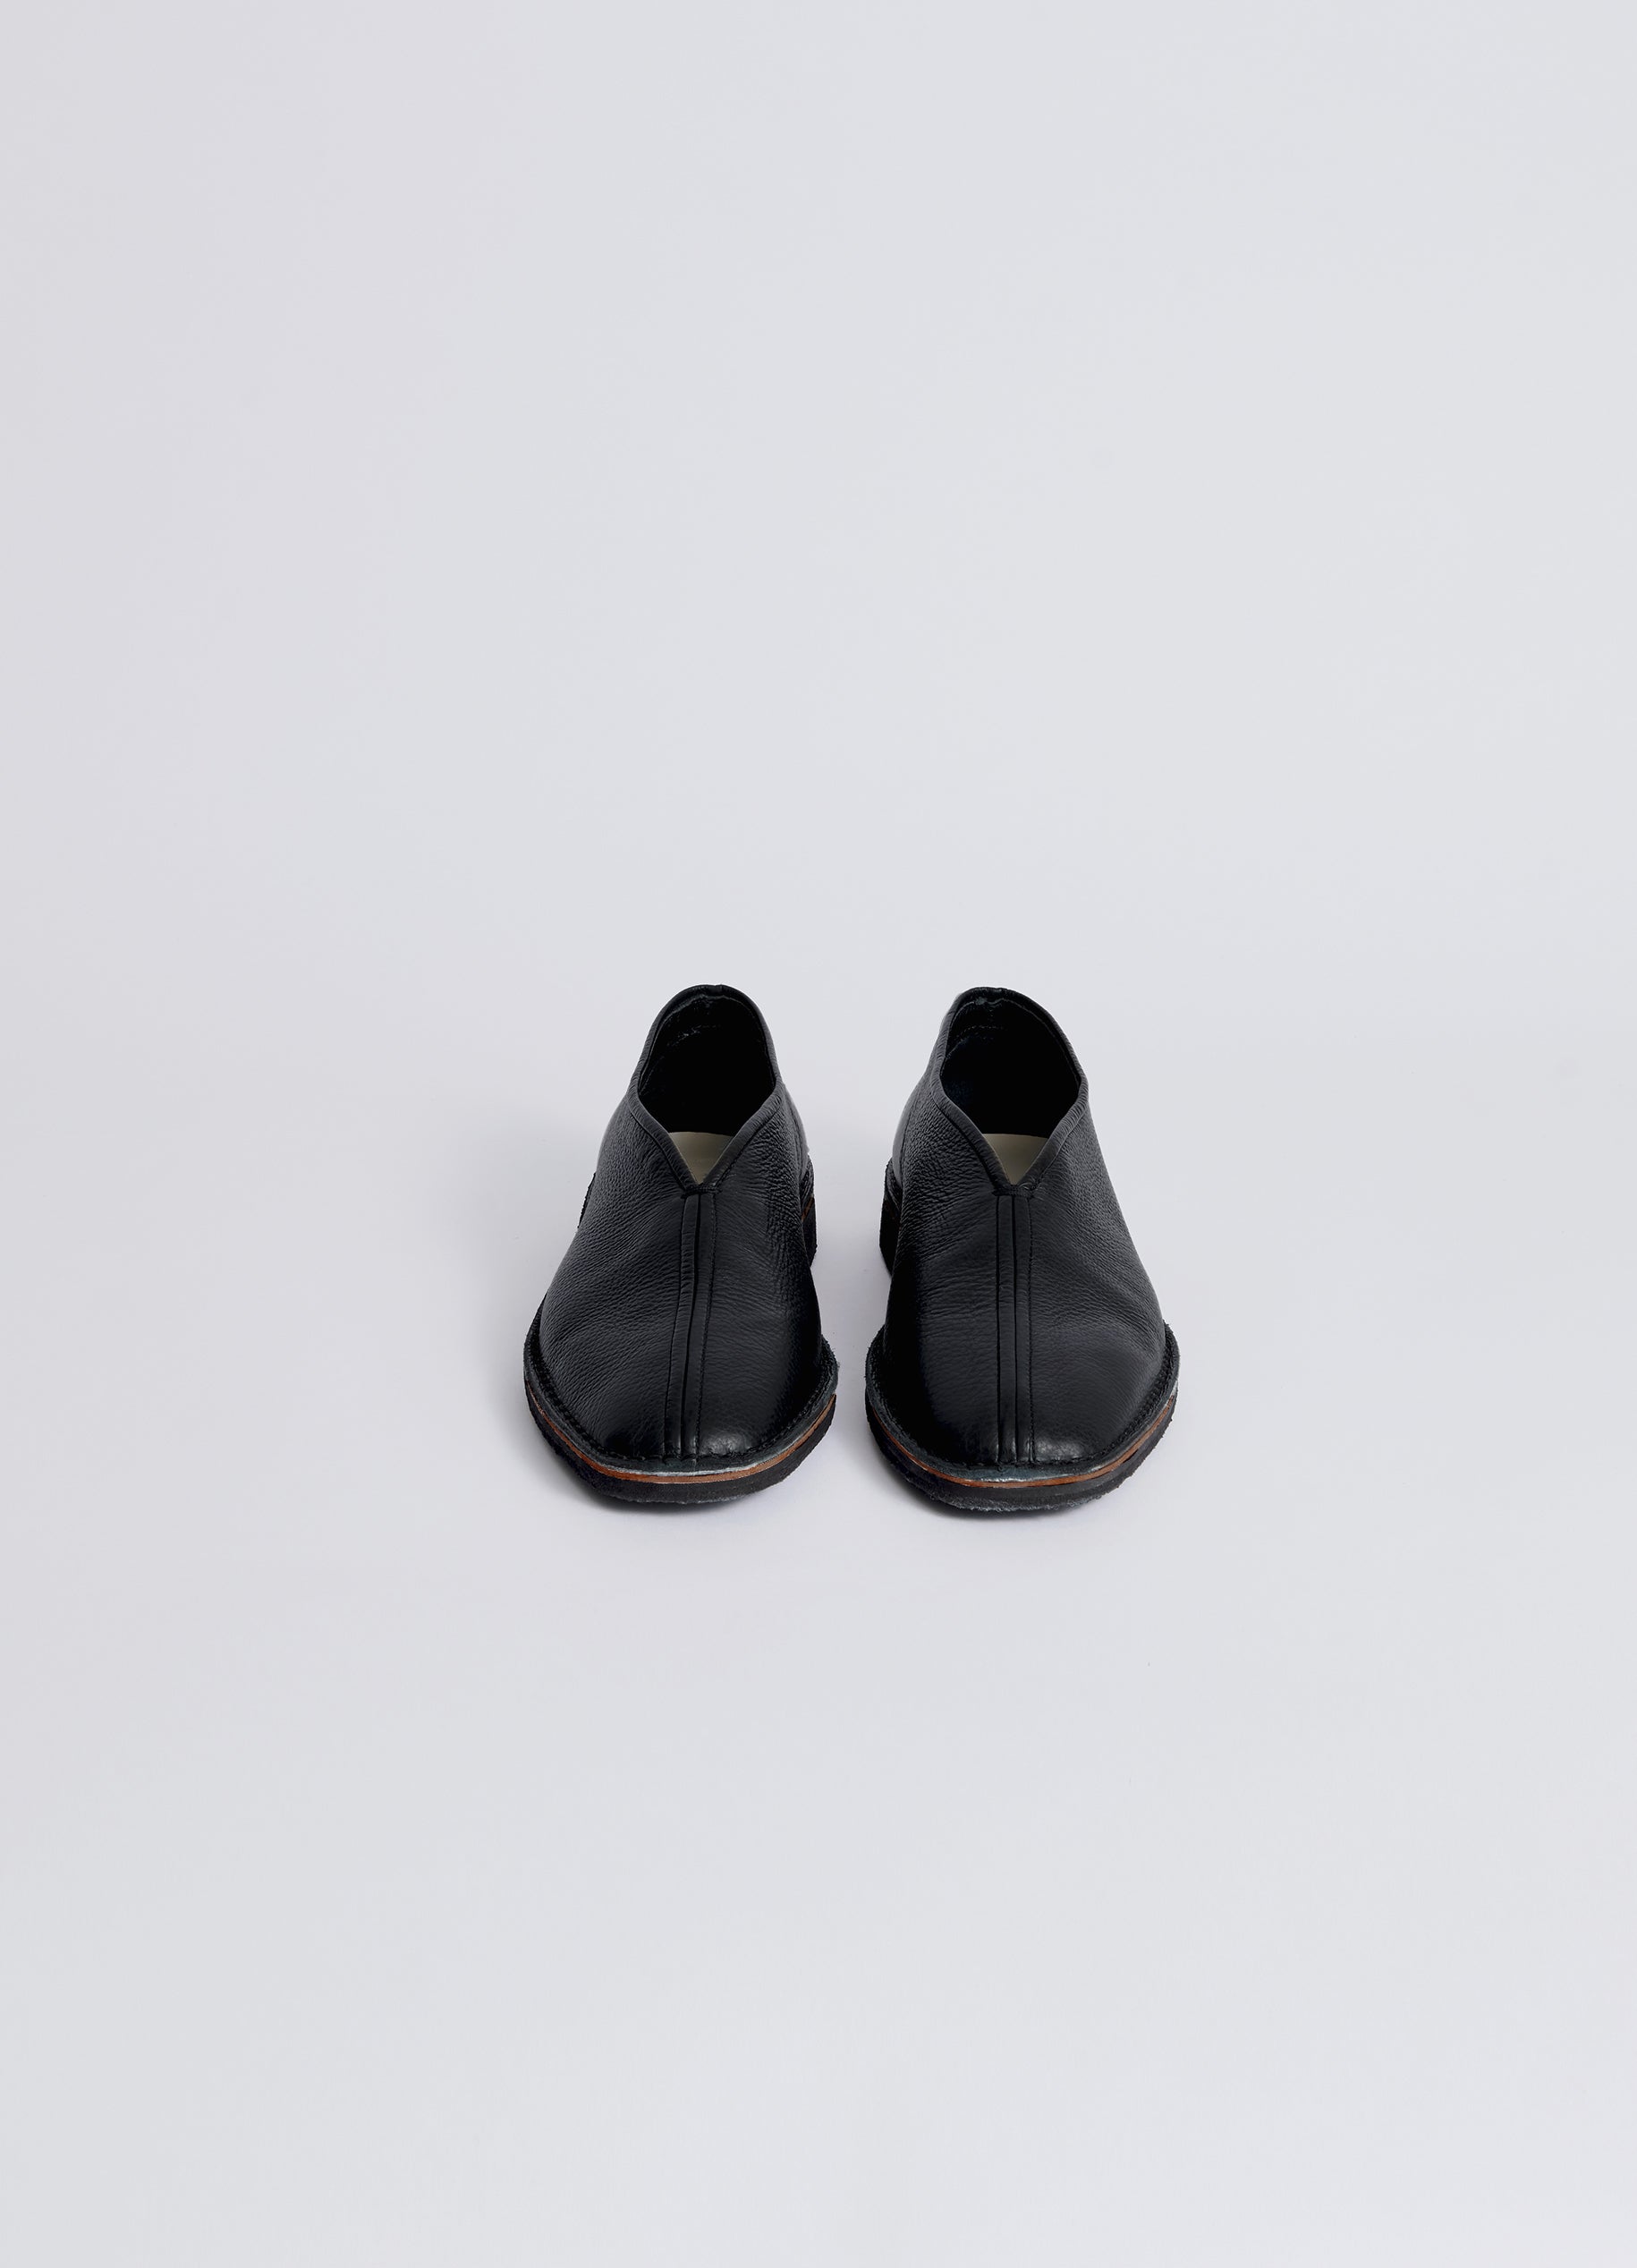 black chinese slipper shoes